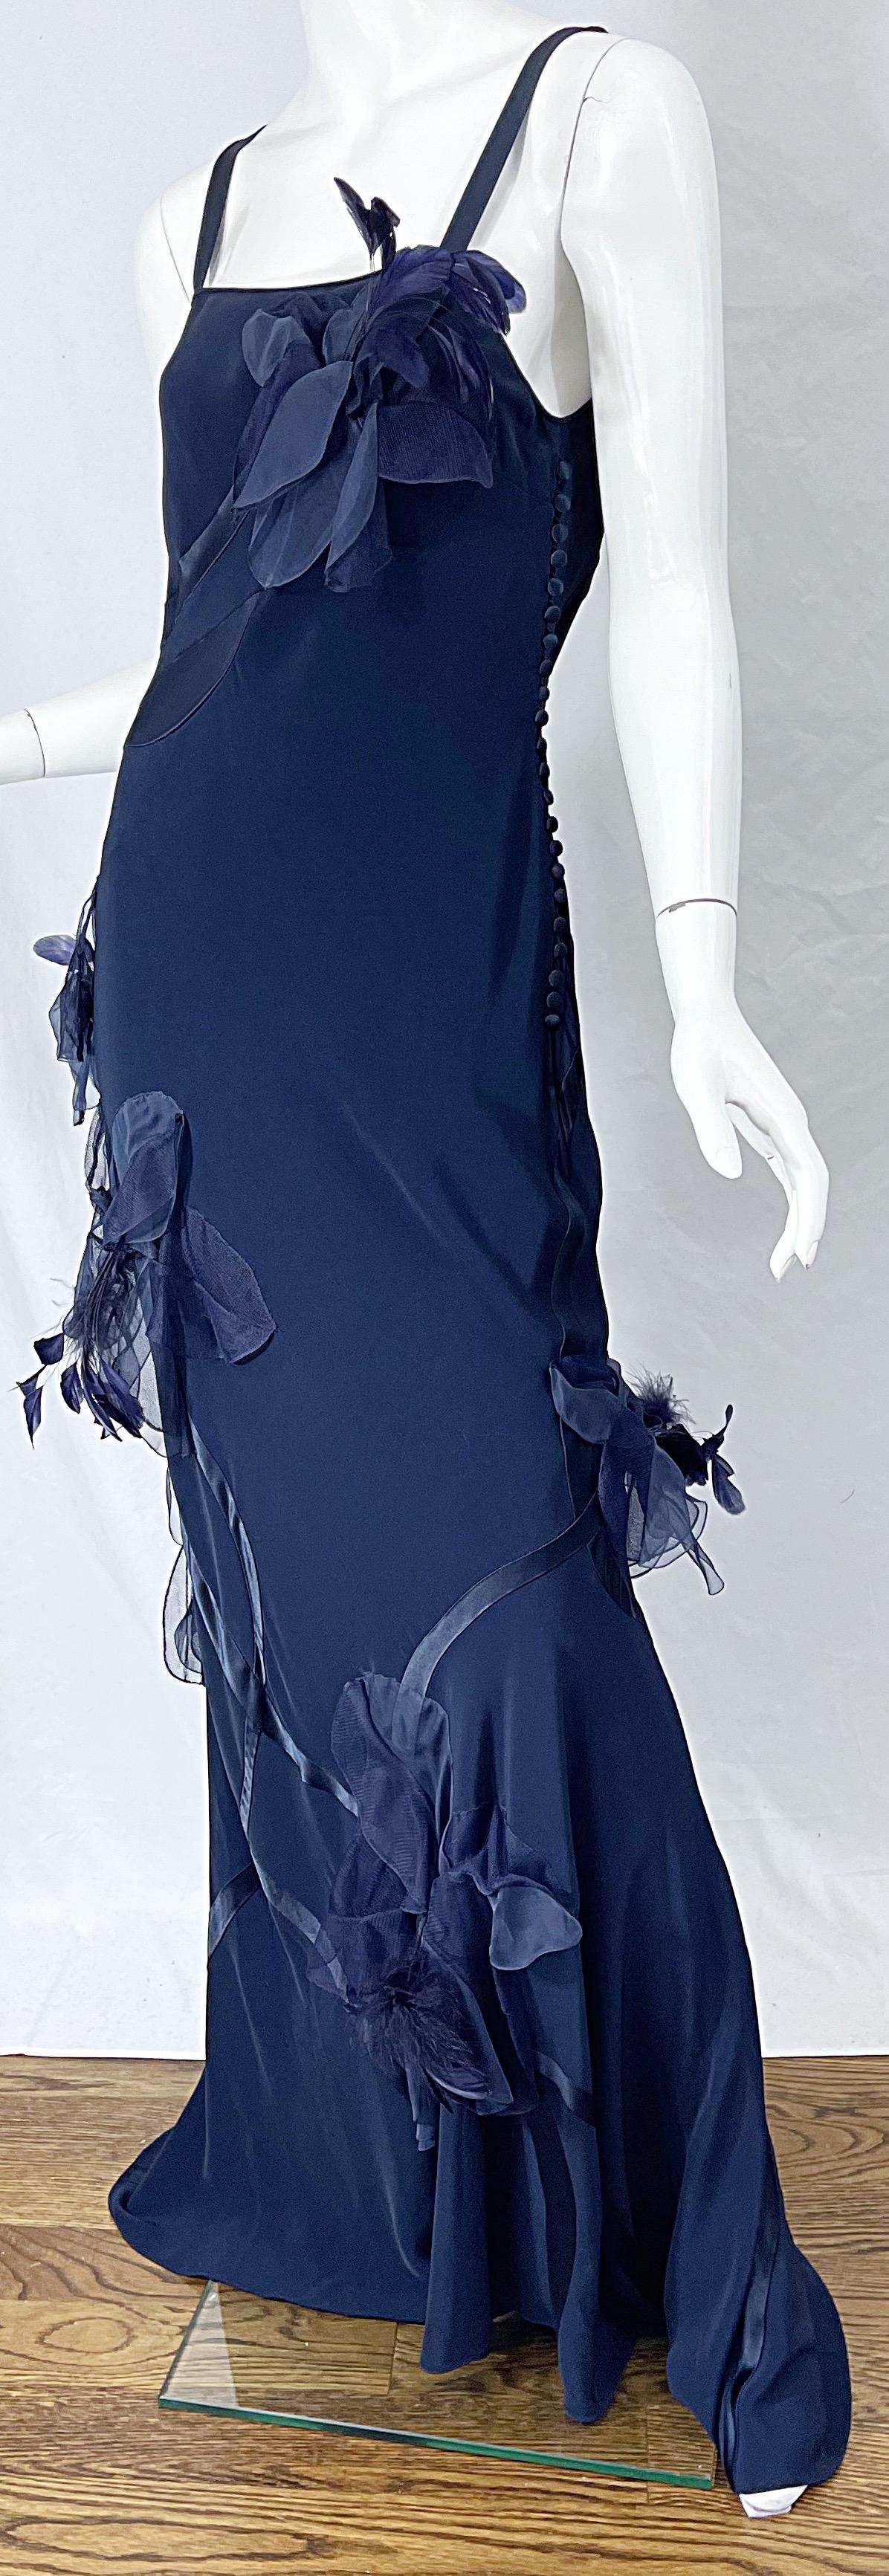 NWT John Galliano Size 10 Early 2000s Navy Blue Feather Silk / Satin Gown Dress 7